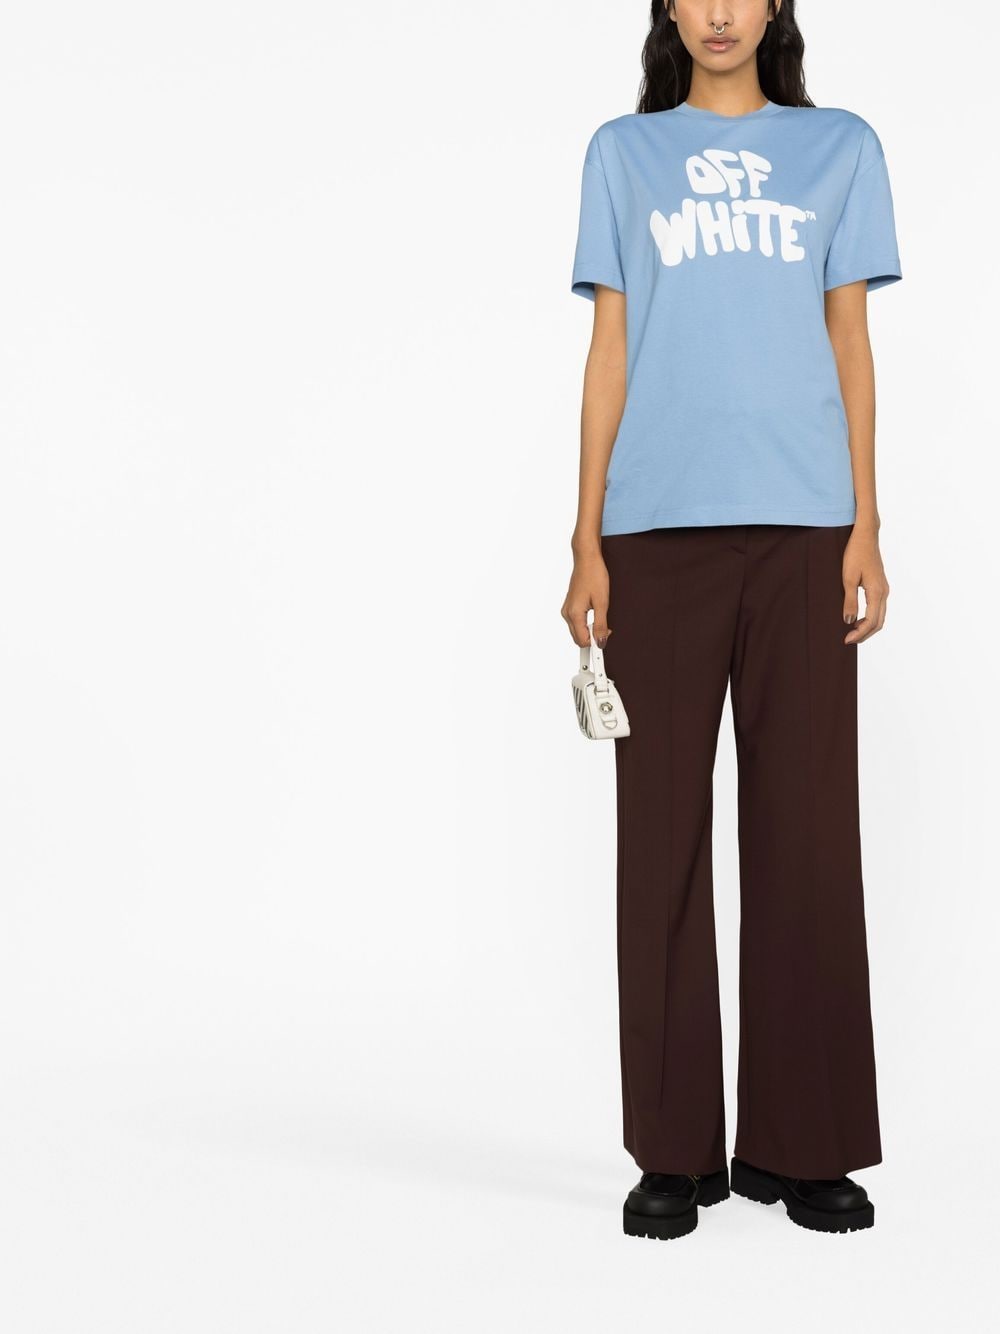 OFF WHITE 70s TYPE LOGO CASUAL TEE LIGHT BLUE WHI